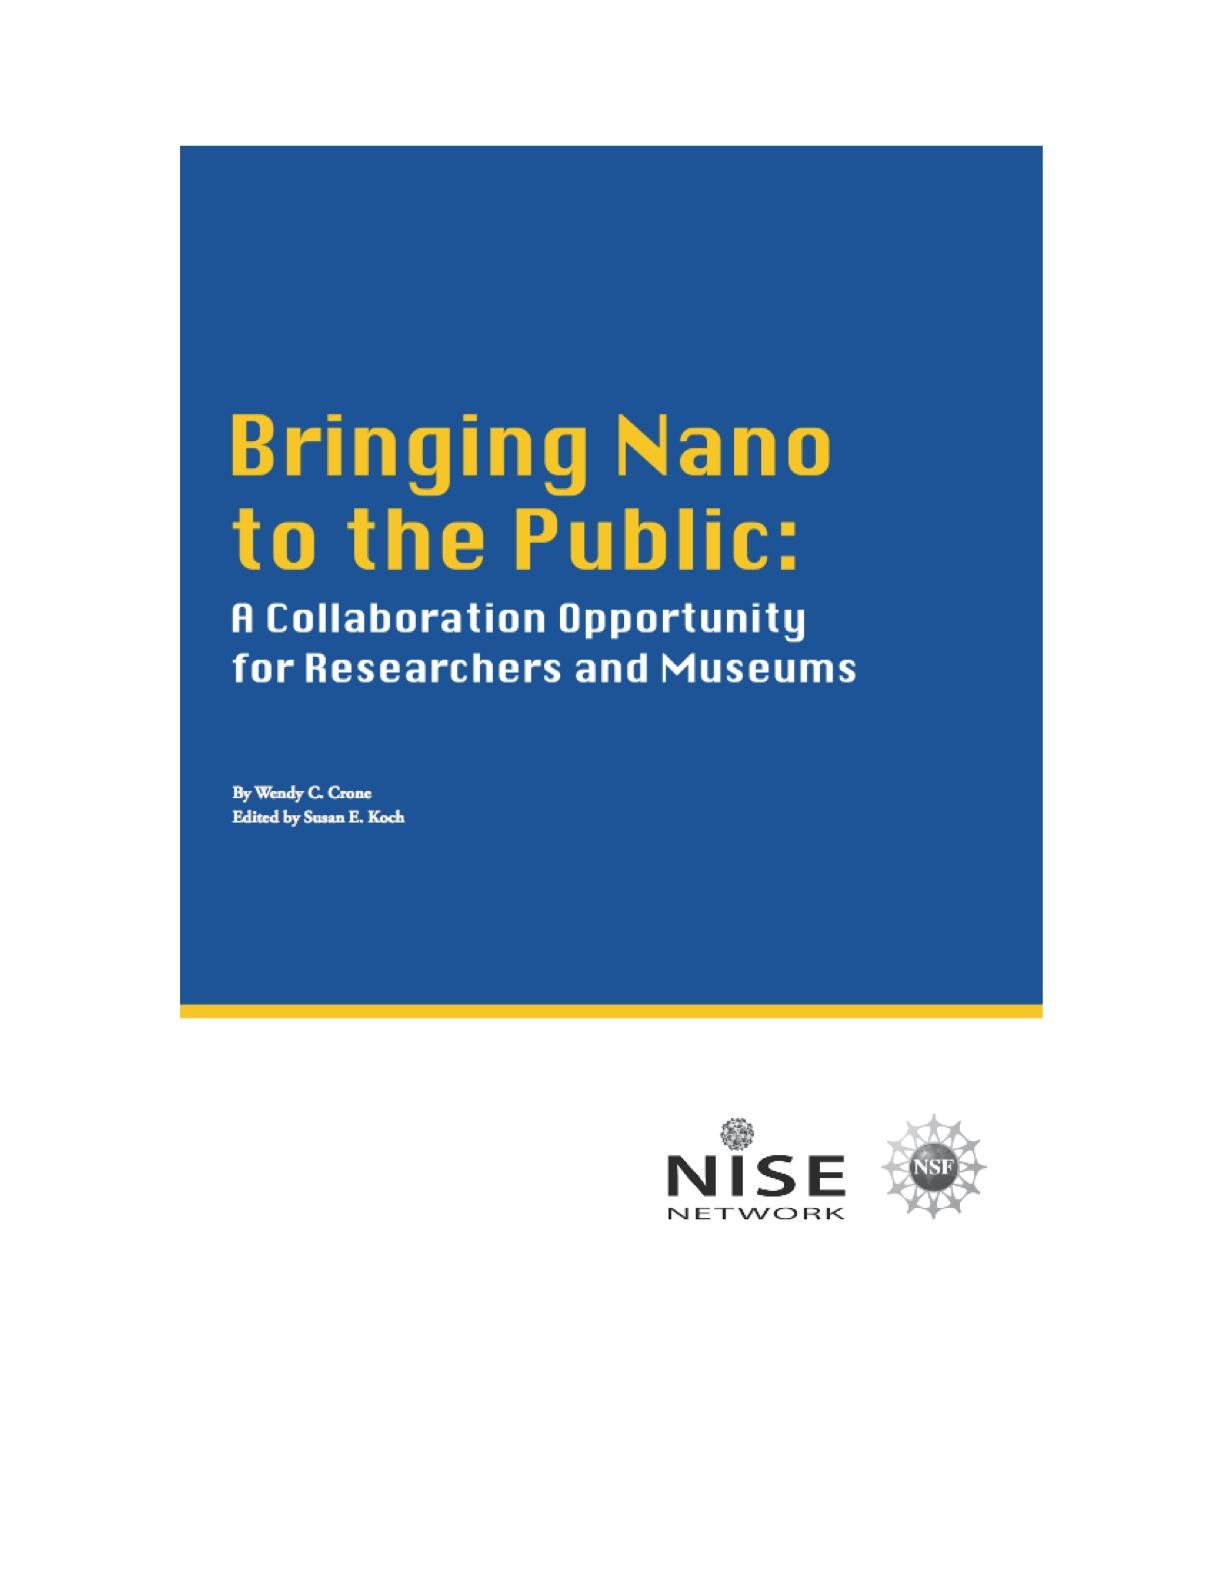 Photo of the cover for the Bringing Nano to the Public: A Collaboration Opportunity for Researchers and Museums guide